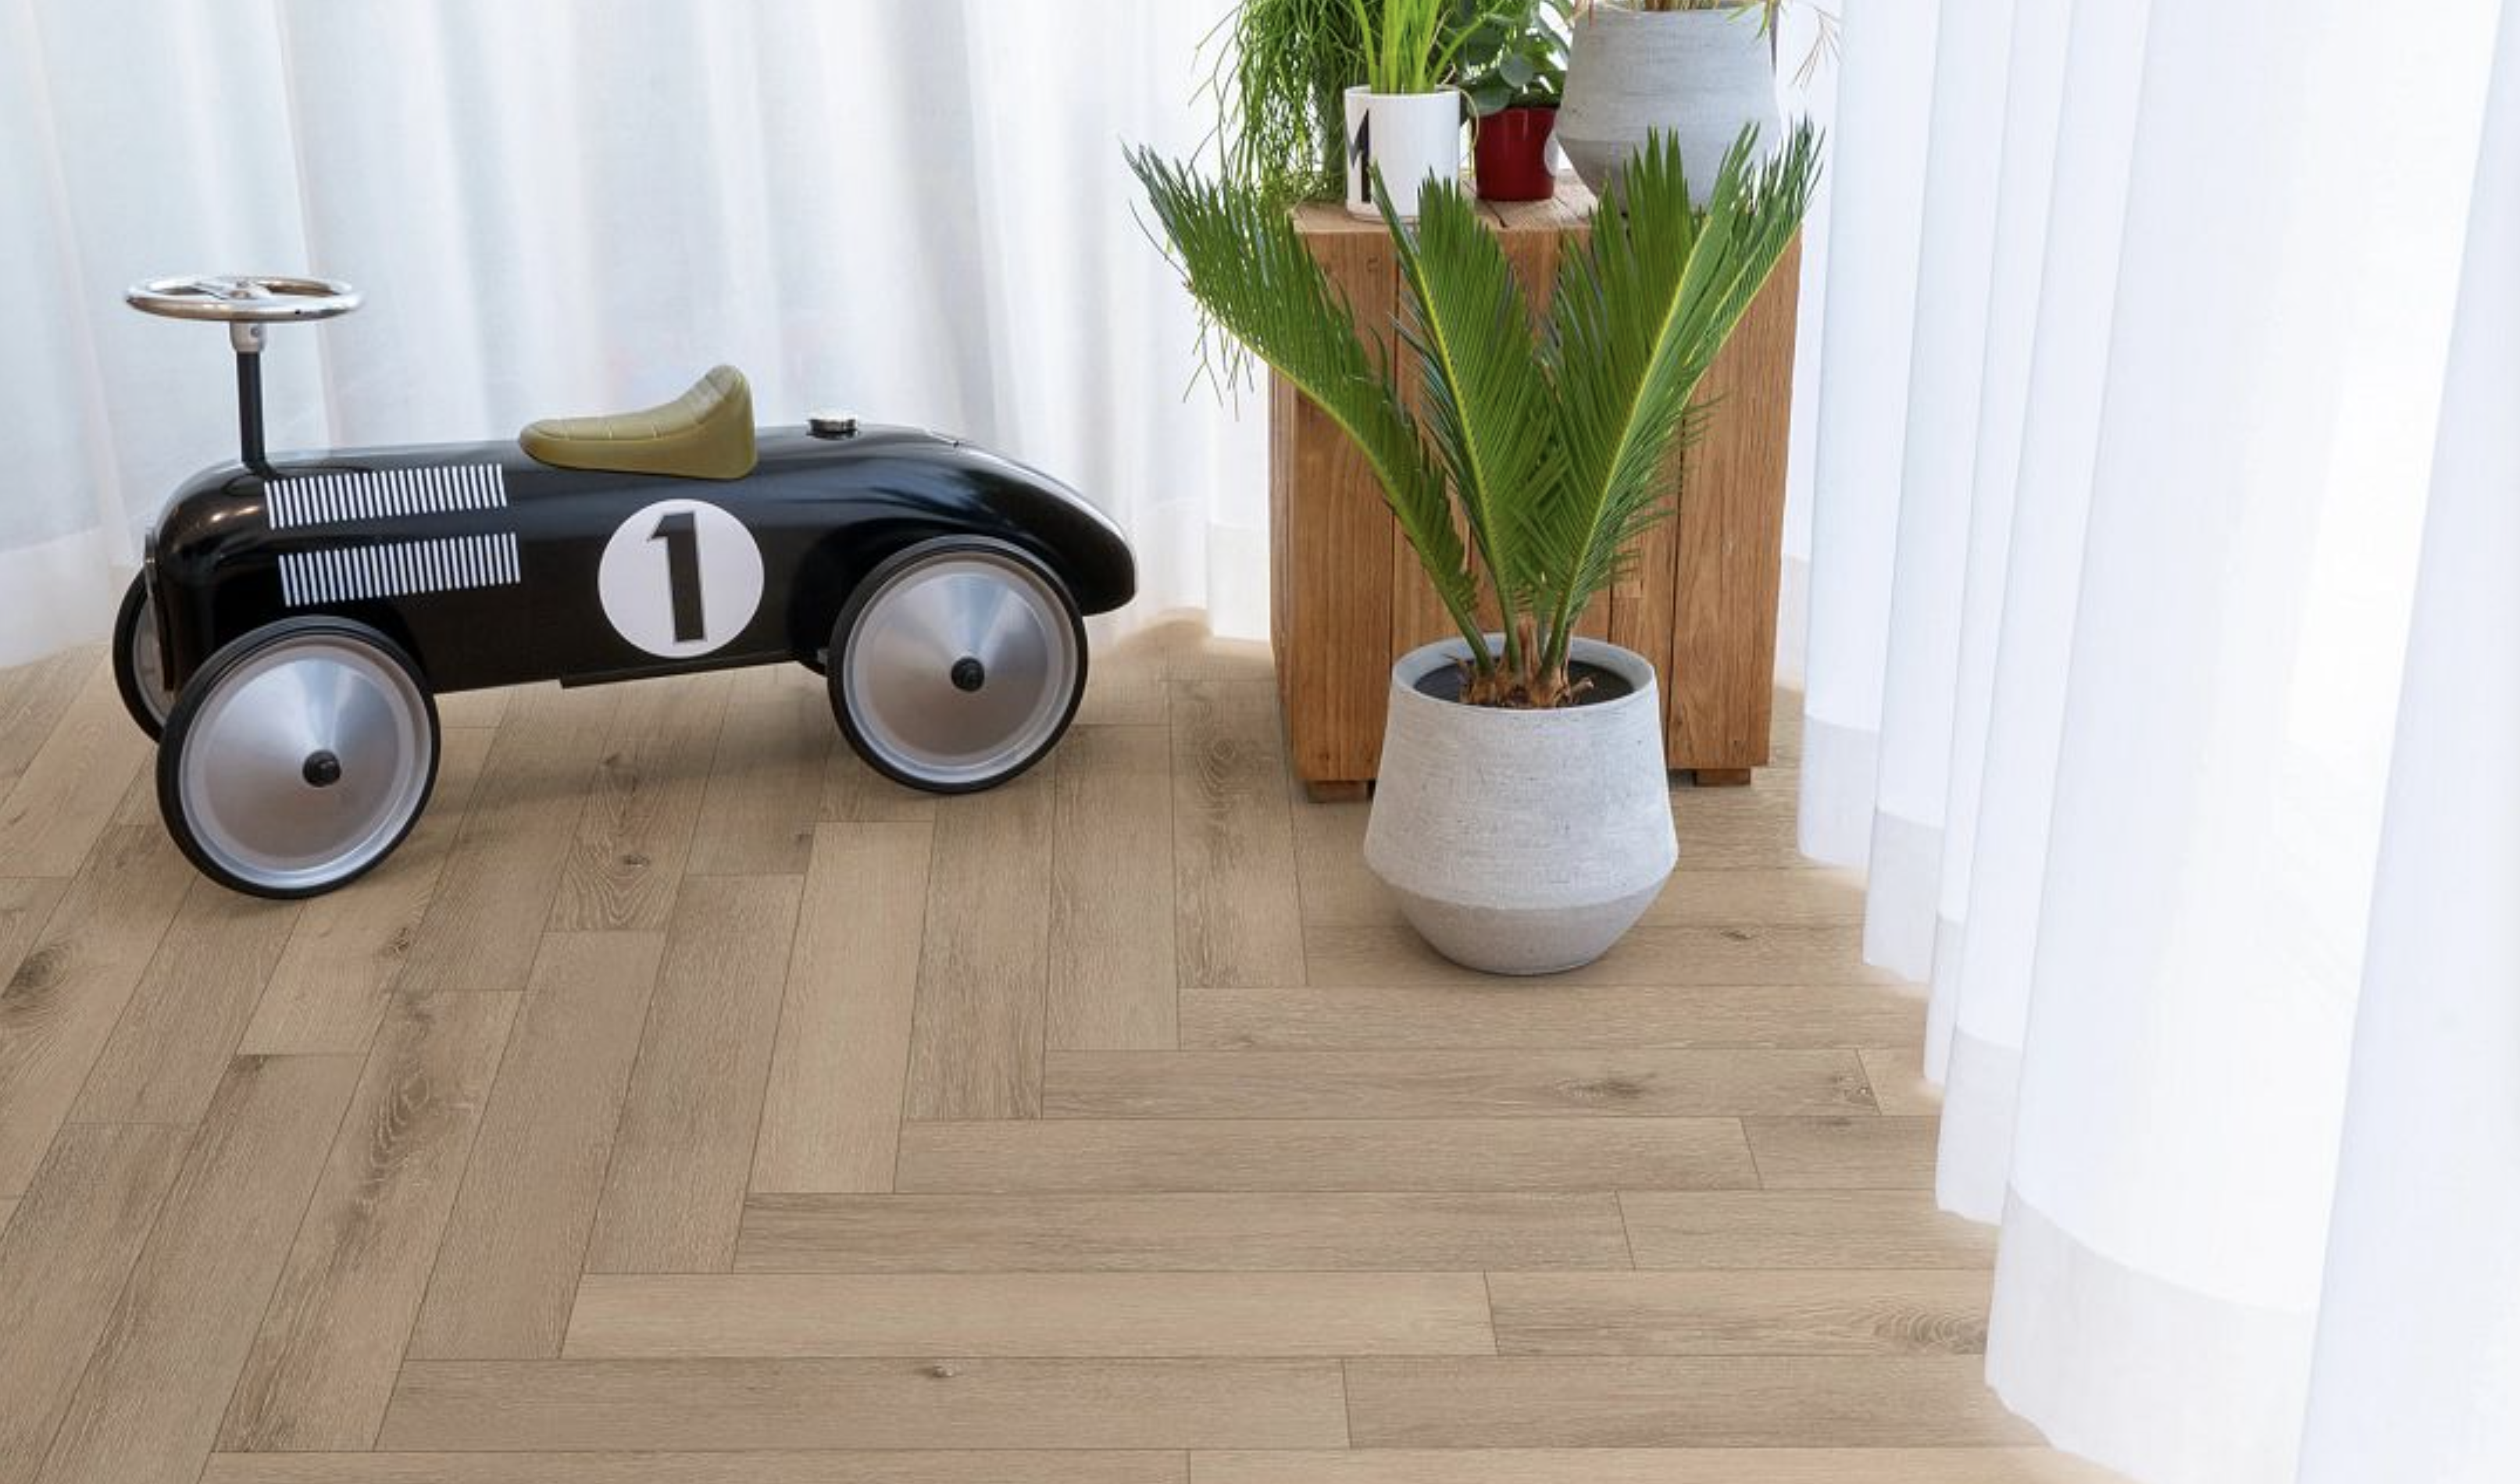 CoreTec Luxury Vinyl Tile is give you the sophisticated look of hardwood floors with the versatility and durability of Laminate.